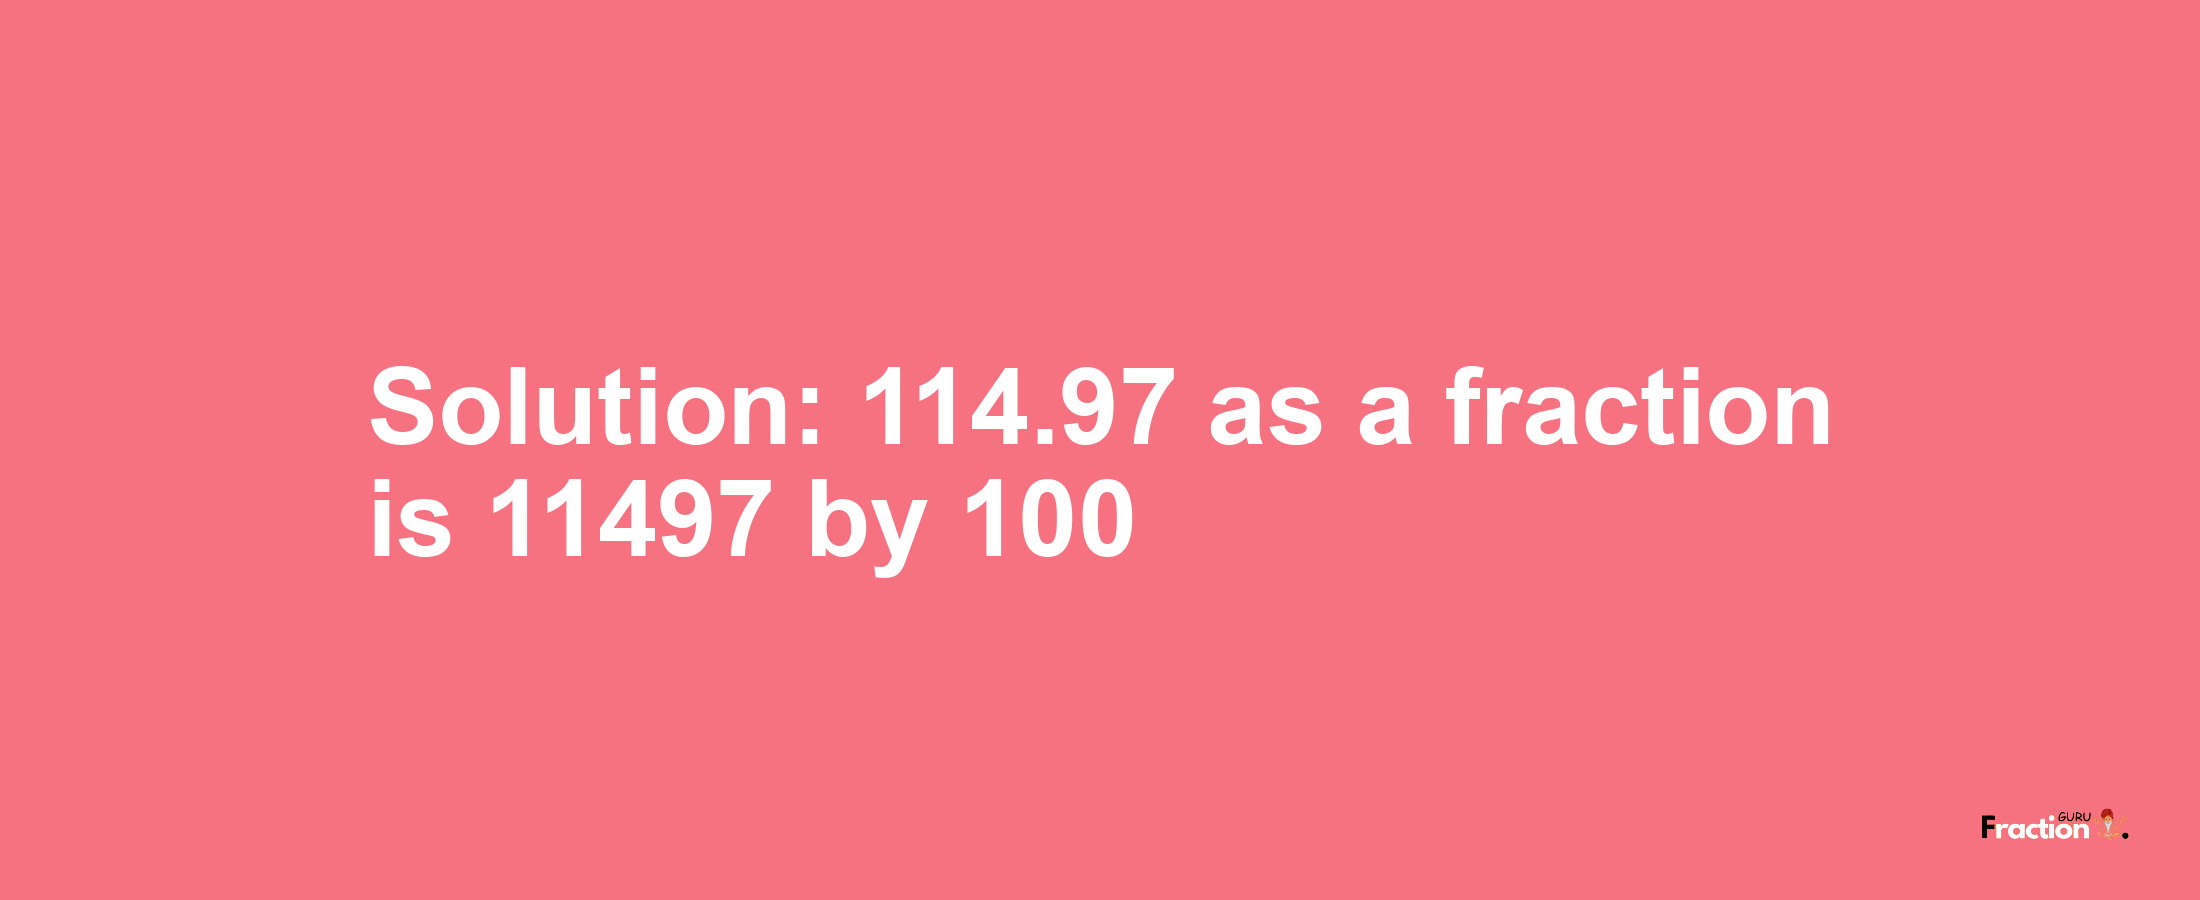 Solution:114.97 as a fraction is 11497/100